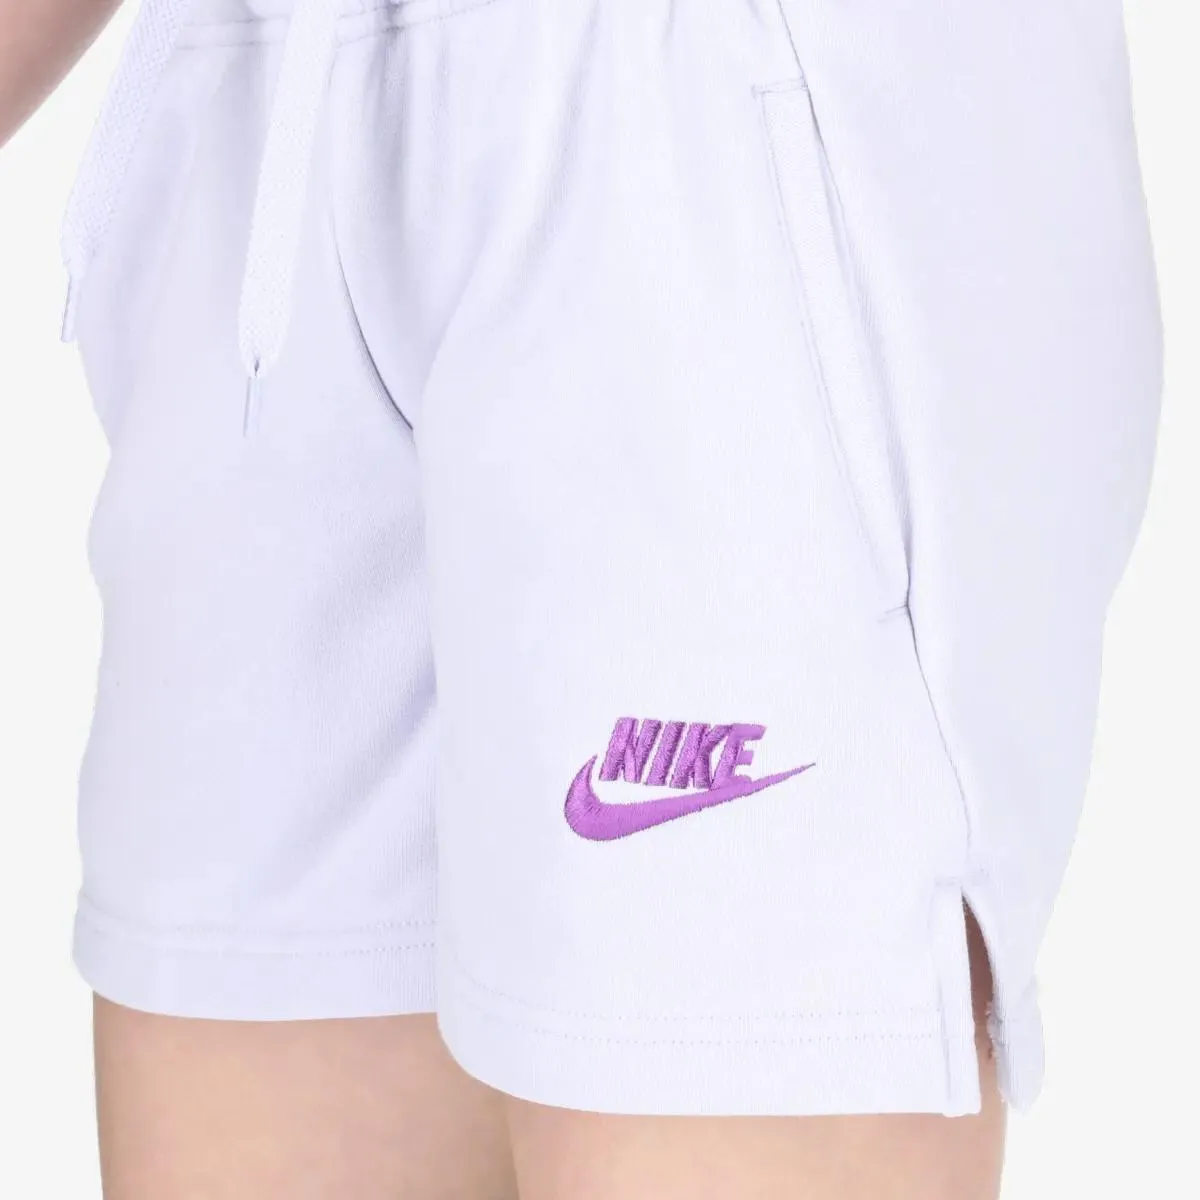 Nike G NSW CLUB FT 5 IN SHORT 